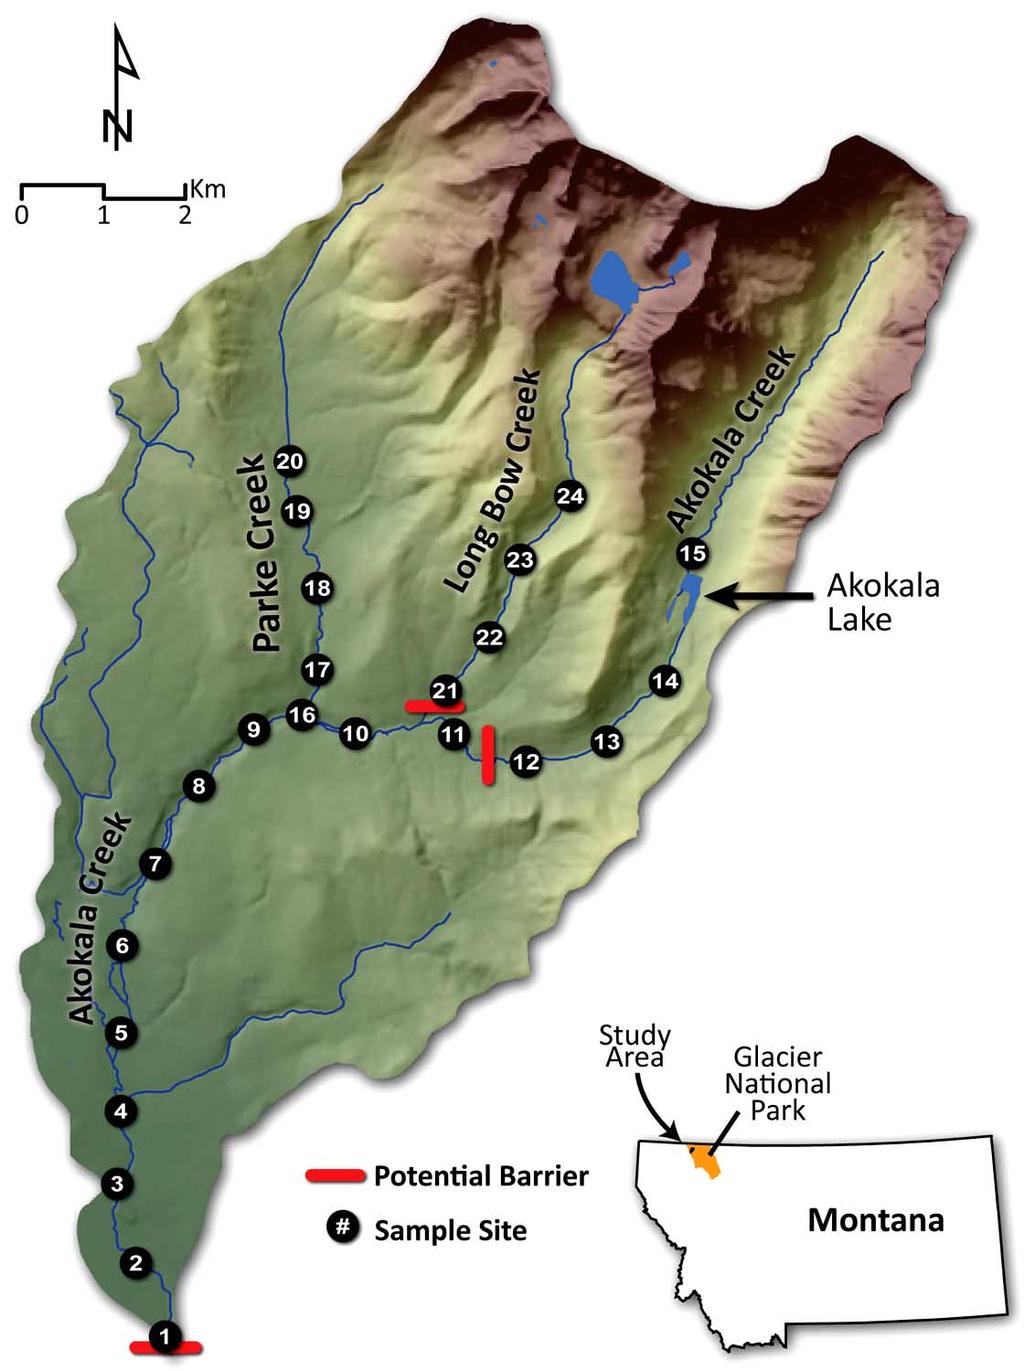 10 The Open Fish Science Journal, 2012, Volume 5 Muhlfeld et al. Fig. (1). Sampling sites in the Akokala Creek watershed and the potential barrier locations assessed in the study.